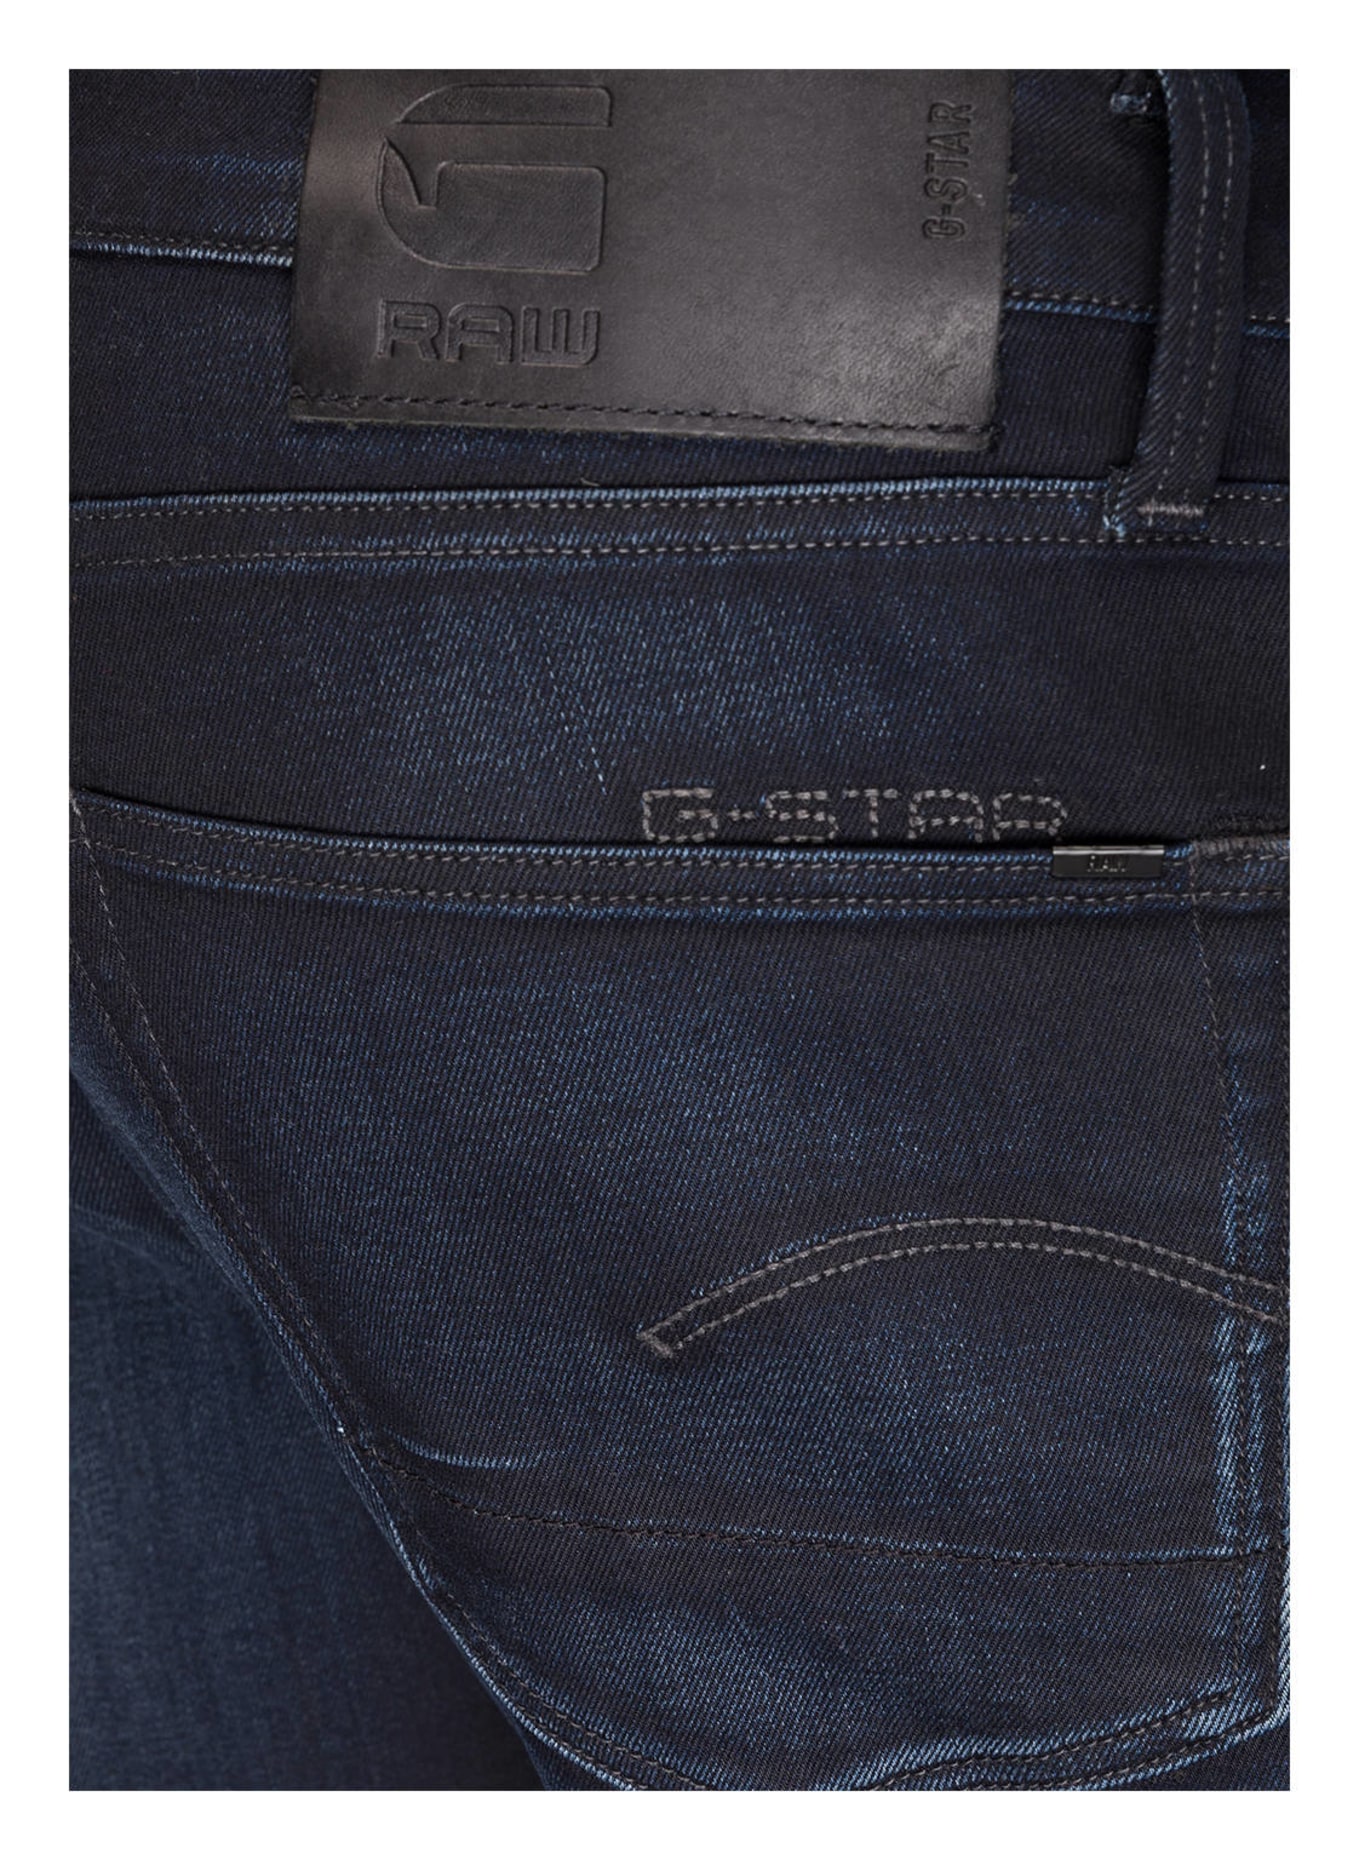 G-Star RAW Jeans 3301 slim fit, Color: 89 DK AGED (Image 5)